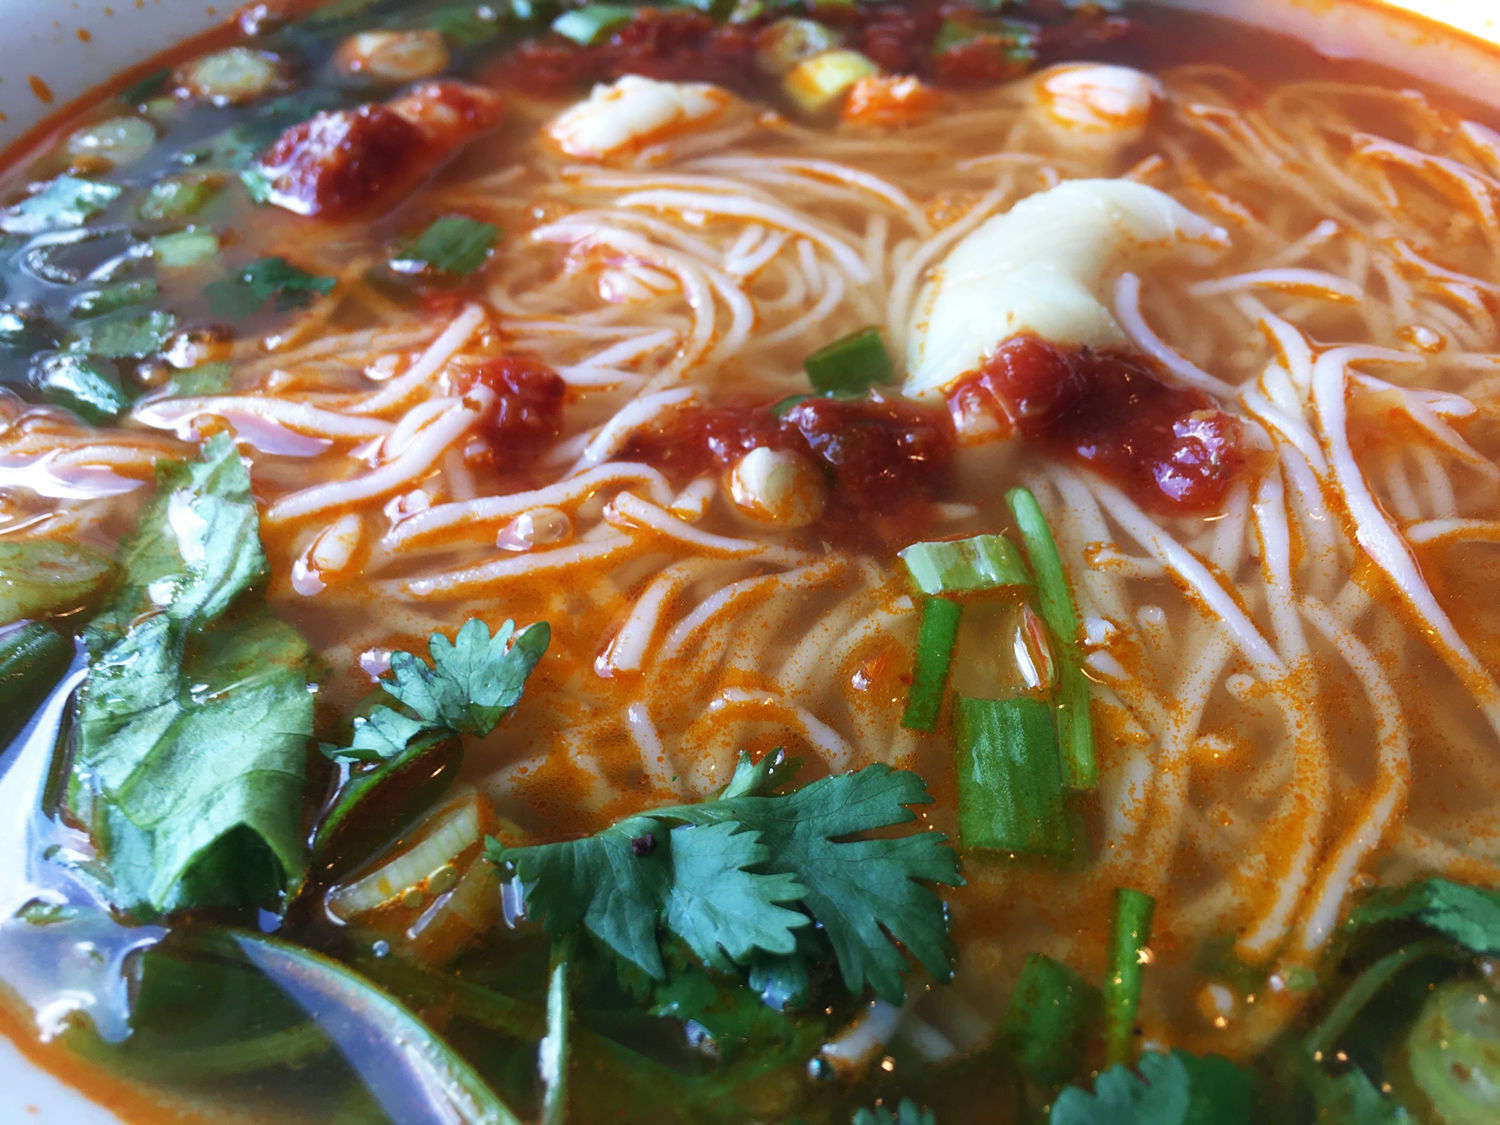 <p><span style="font-weight: 400;"><strong>$12.95:</strong> If you’re a fan of pho, but haven’t branched out to southern Vietnamese cooking, let the menu at </span><span style="font-weight: 400;"><a href="https://www.bunwdc.com/" target="_blank" rel="noopener">Bún DC</a> (pronounced &#8220;boon&#8221; — 2905 Sherman Ave. NW) be your guide. The next bad dish I have will be my first, but the one I always go back to is the </span><span style="font-weight: 400;">#31. </span><span style="font-weight: 400;">Tôm &amp; Mực, an enormous bowl of vermicelli noodle soup with a rich, tomato crab broth unlike anything else I’ve ever had. — Noah Frank</span></p>
<p><span style="font-weight: 400;"><strong>$14.50:</strong> Sushi is expensive. But if you’ve got a hankering for some fresh fish and can’t afford to break the bank, the sakedon at <a href="http://www.donburidc.com/" target="_blank" rel="noopener">Donburi</a> (2438 18th St. NW and 114 19th St. NW) is a pile of thick-cut salmon on top of a bowl of rice along with pickled cucumbers, radish, and ginger. It’s a full meal, all for a reasonable price. — Noah Frank</span></p>
